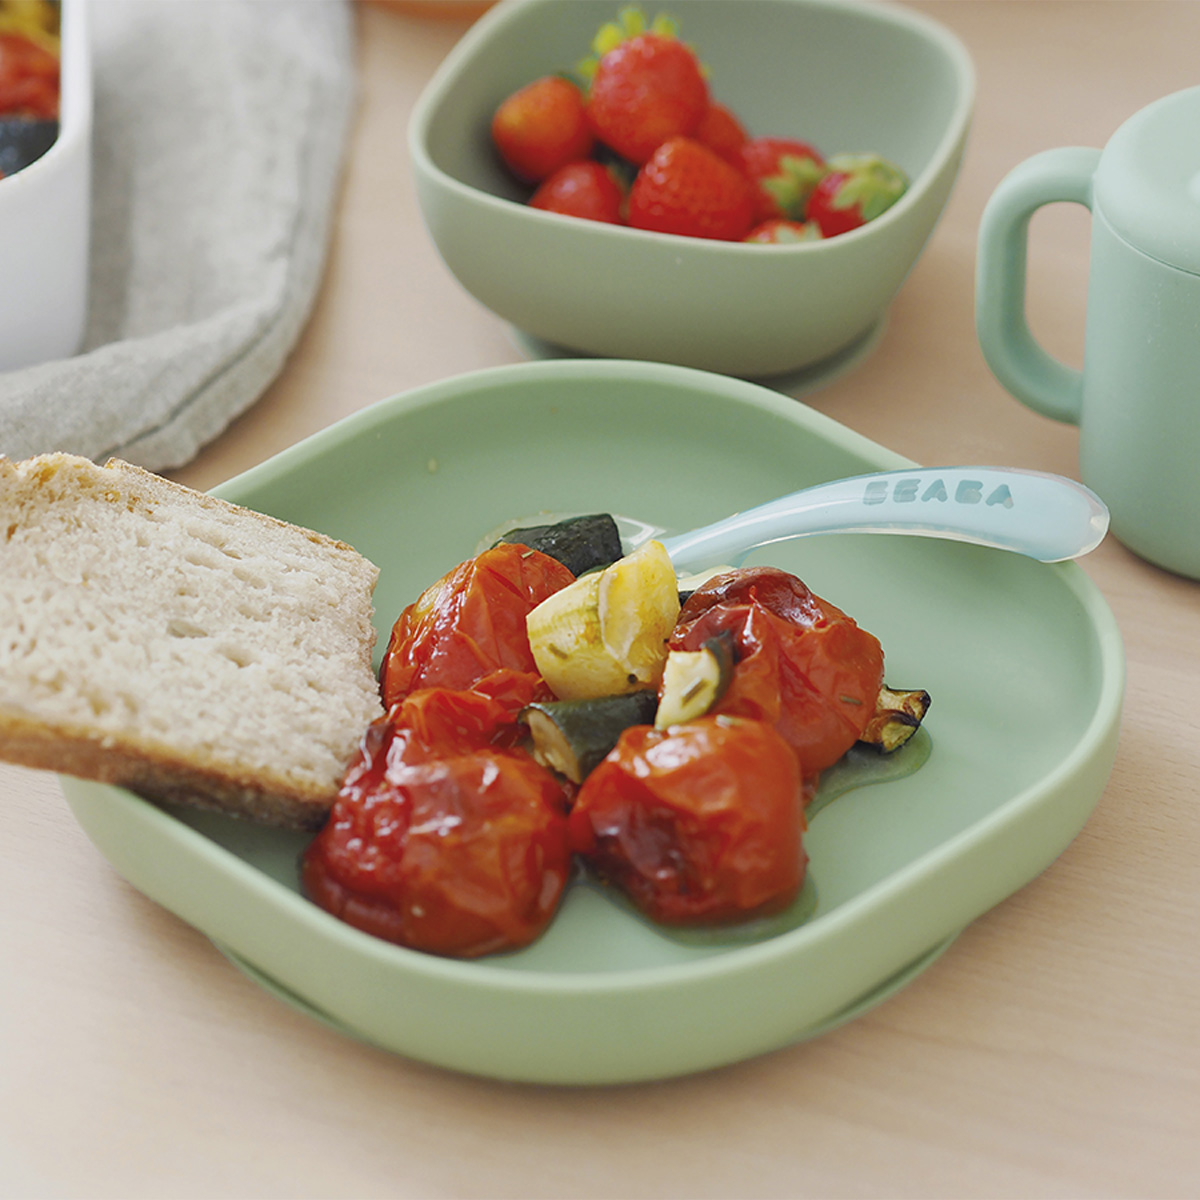 silicone suction plate sage green on kitchen table with tomatoes and toast